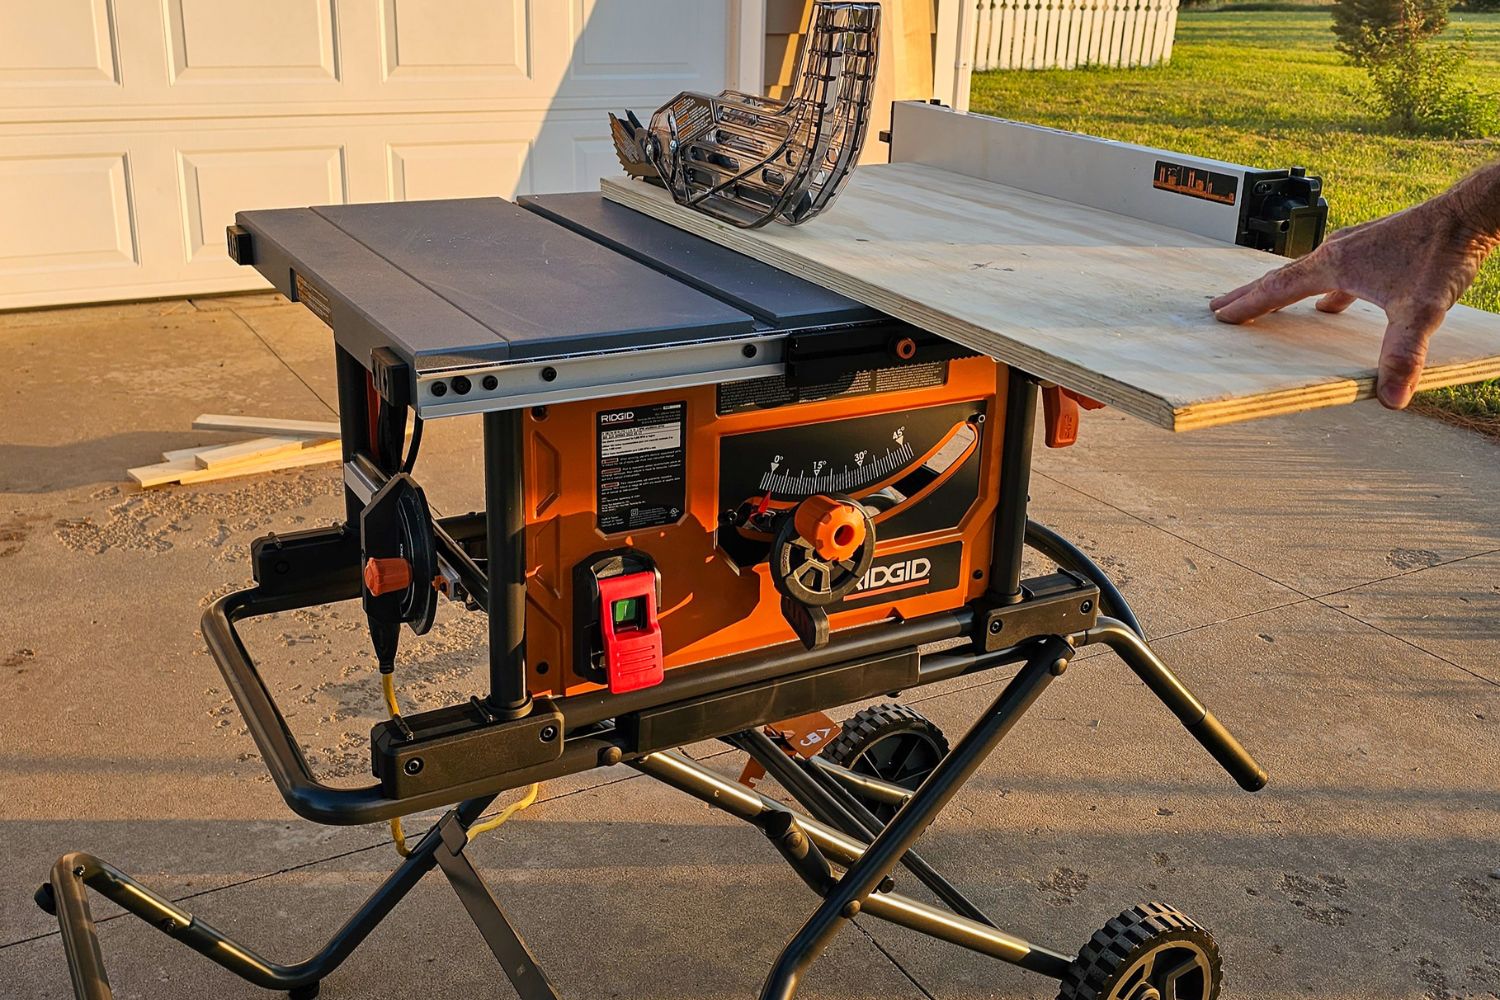 A person using the best table saw option in a driveway